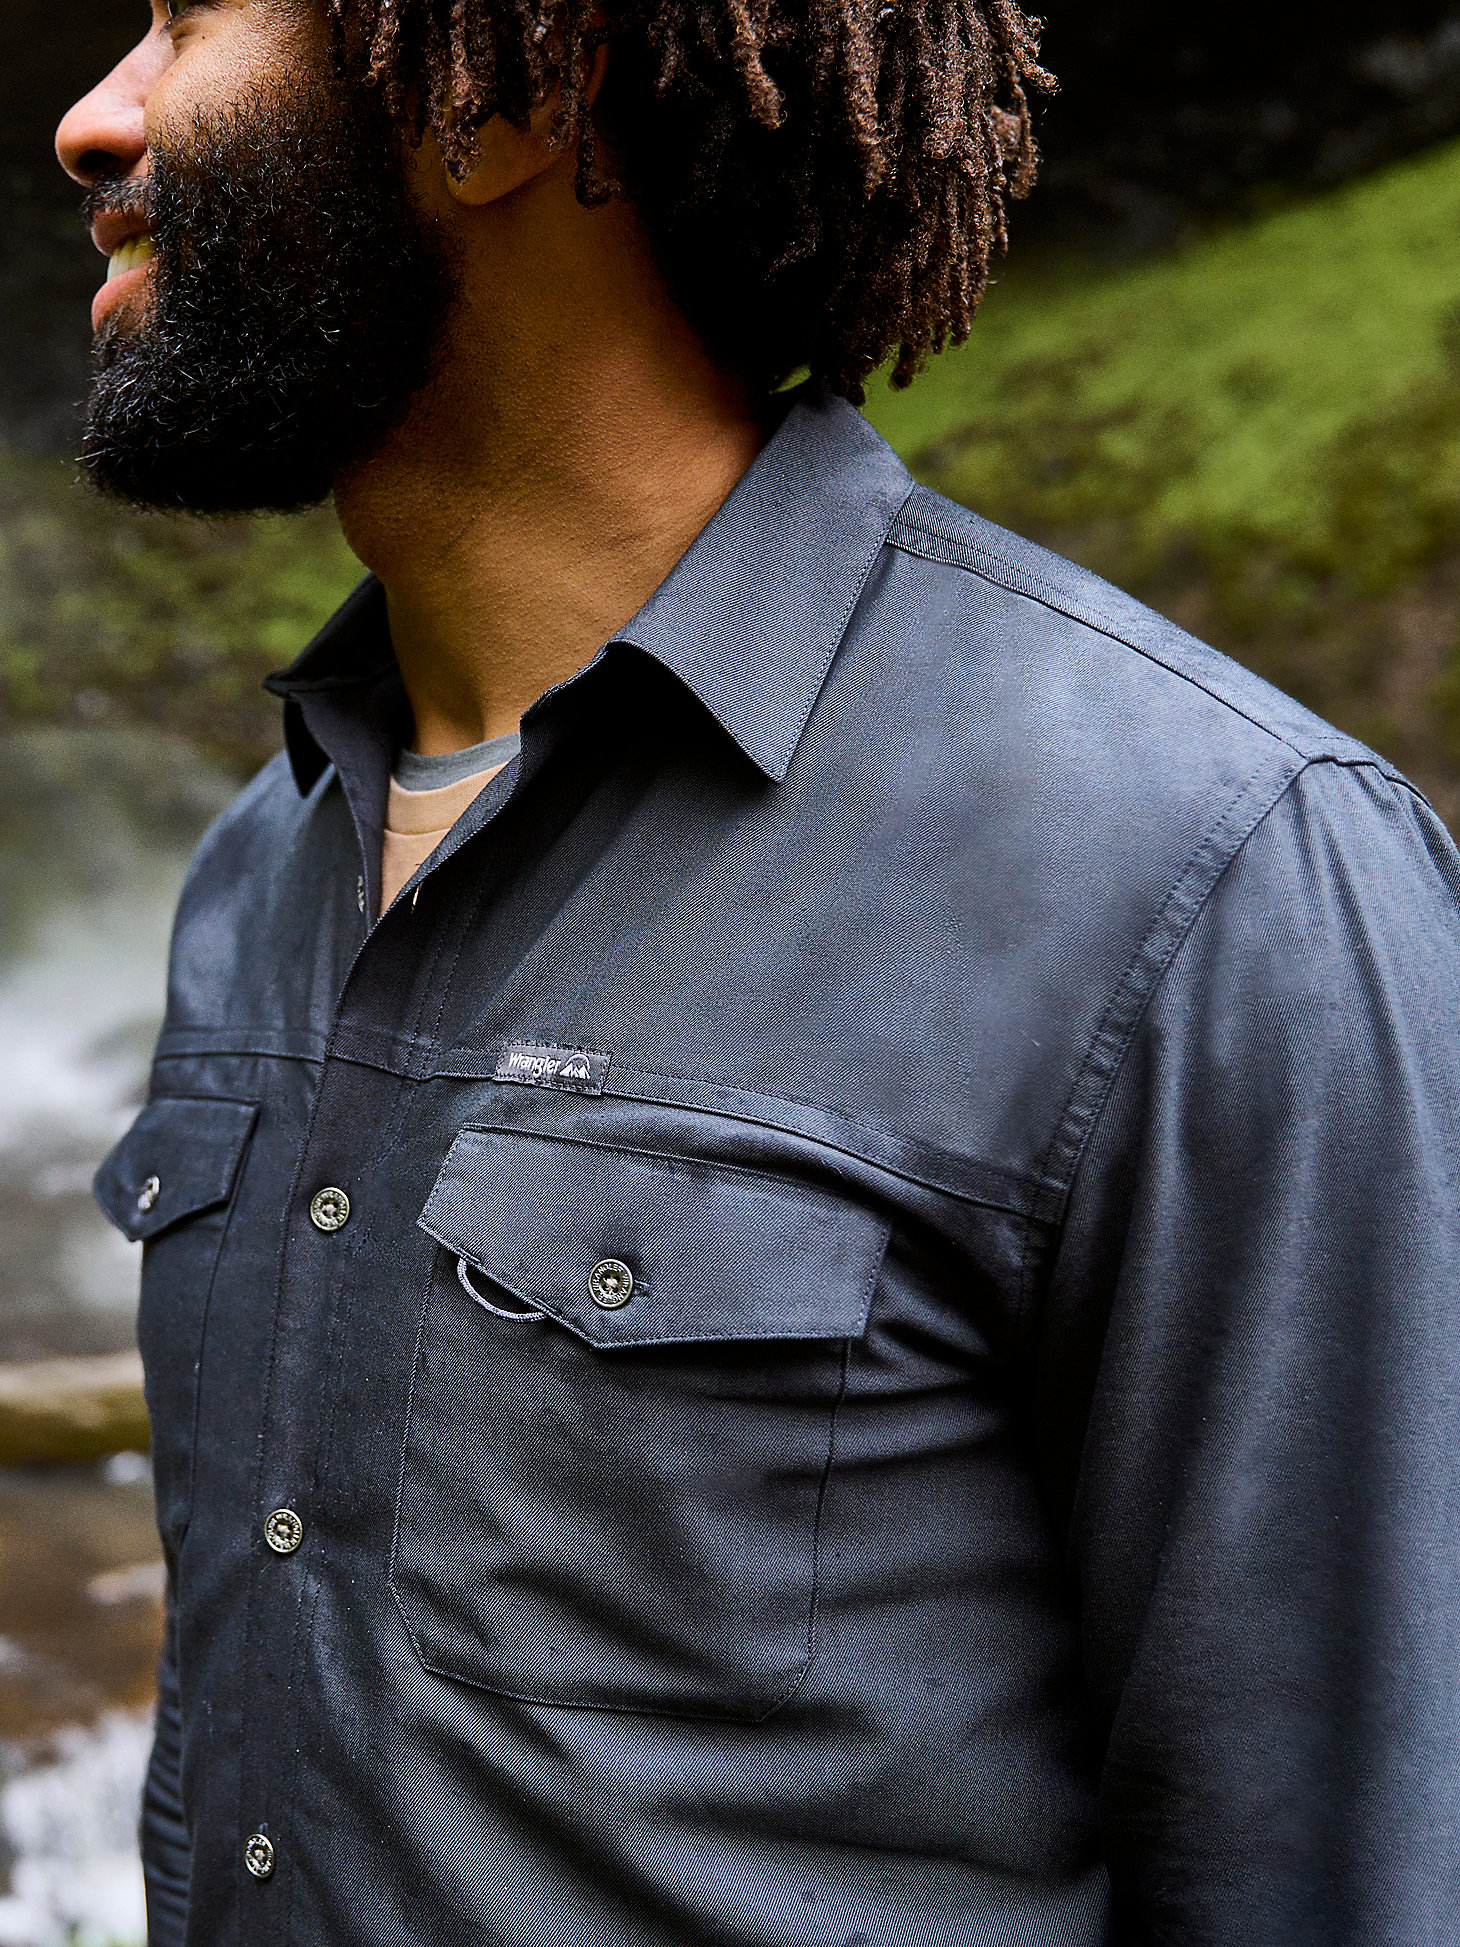 Men's Utility Outdoor Shirt in Anthracite alternative view 1